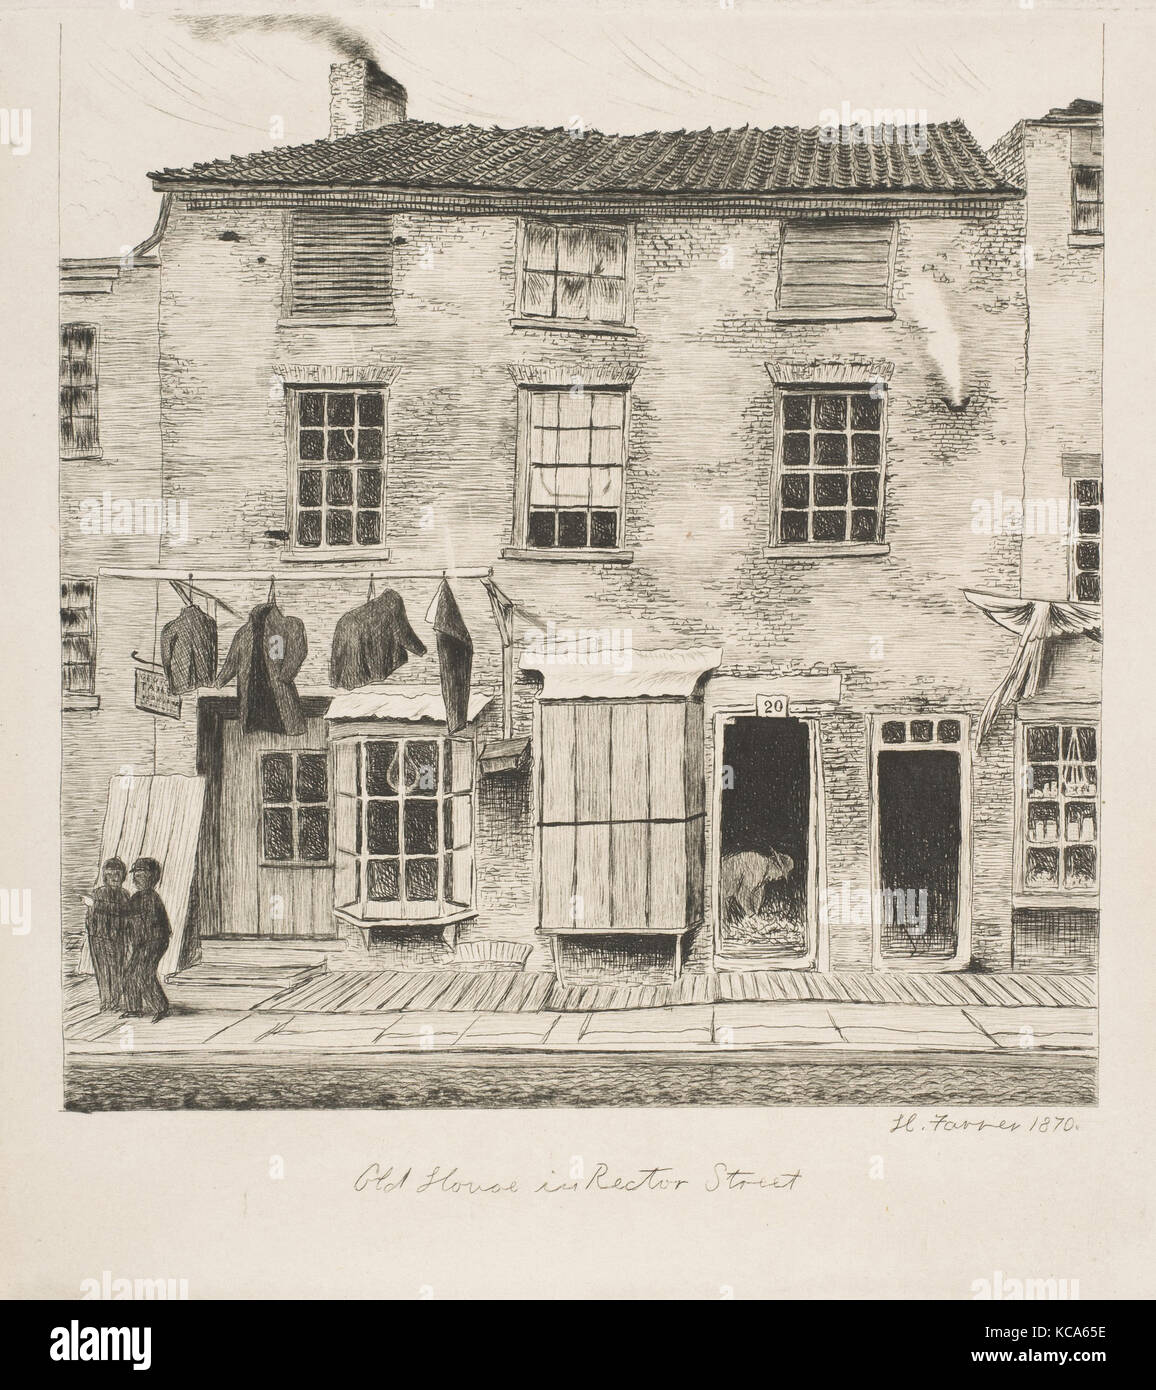 Old House in Rector Street (from Scenes of Old New York), Henry Farrer, 1870 Stock Photo